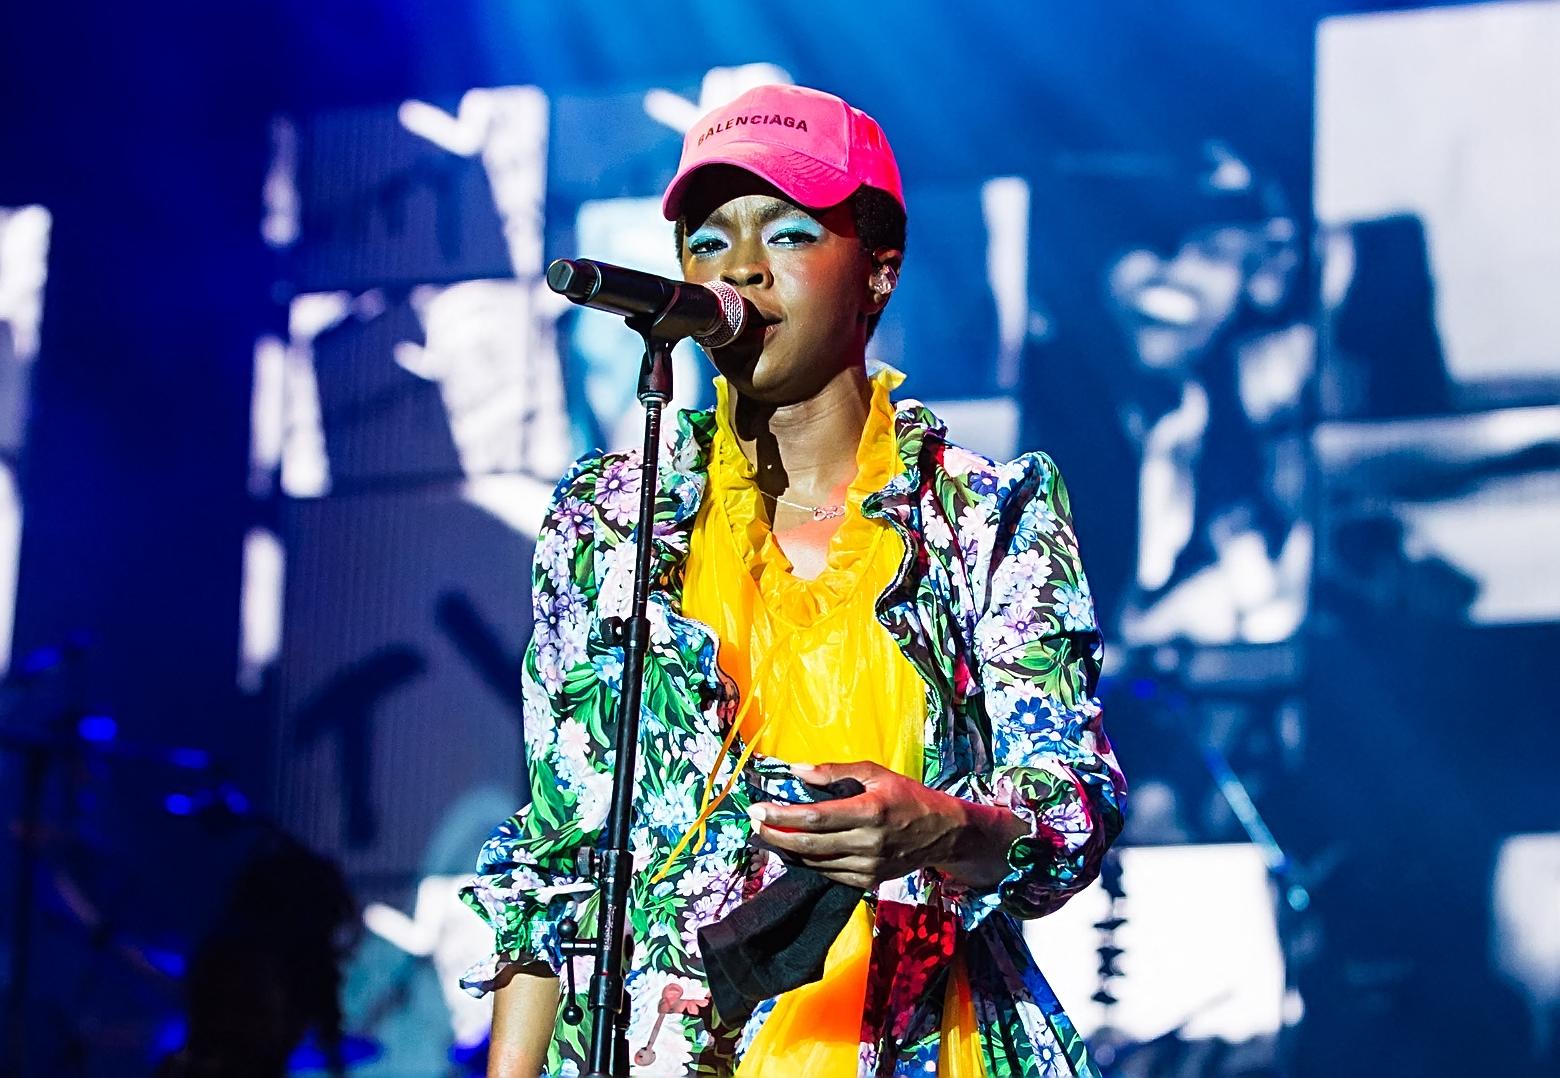 Ms. Lauryn Hill and M.I.A. perform during The Miseducation of Lauryn Hill 20th Anniversary Tour in Philadelphia